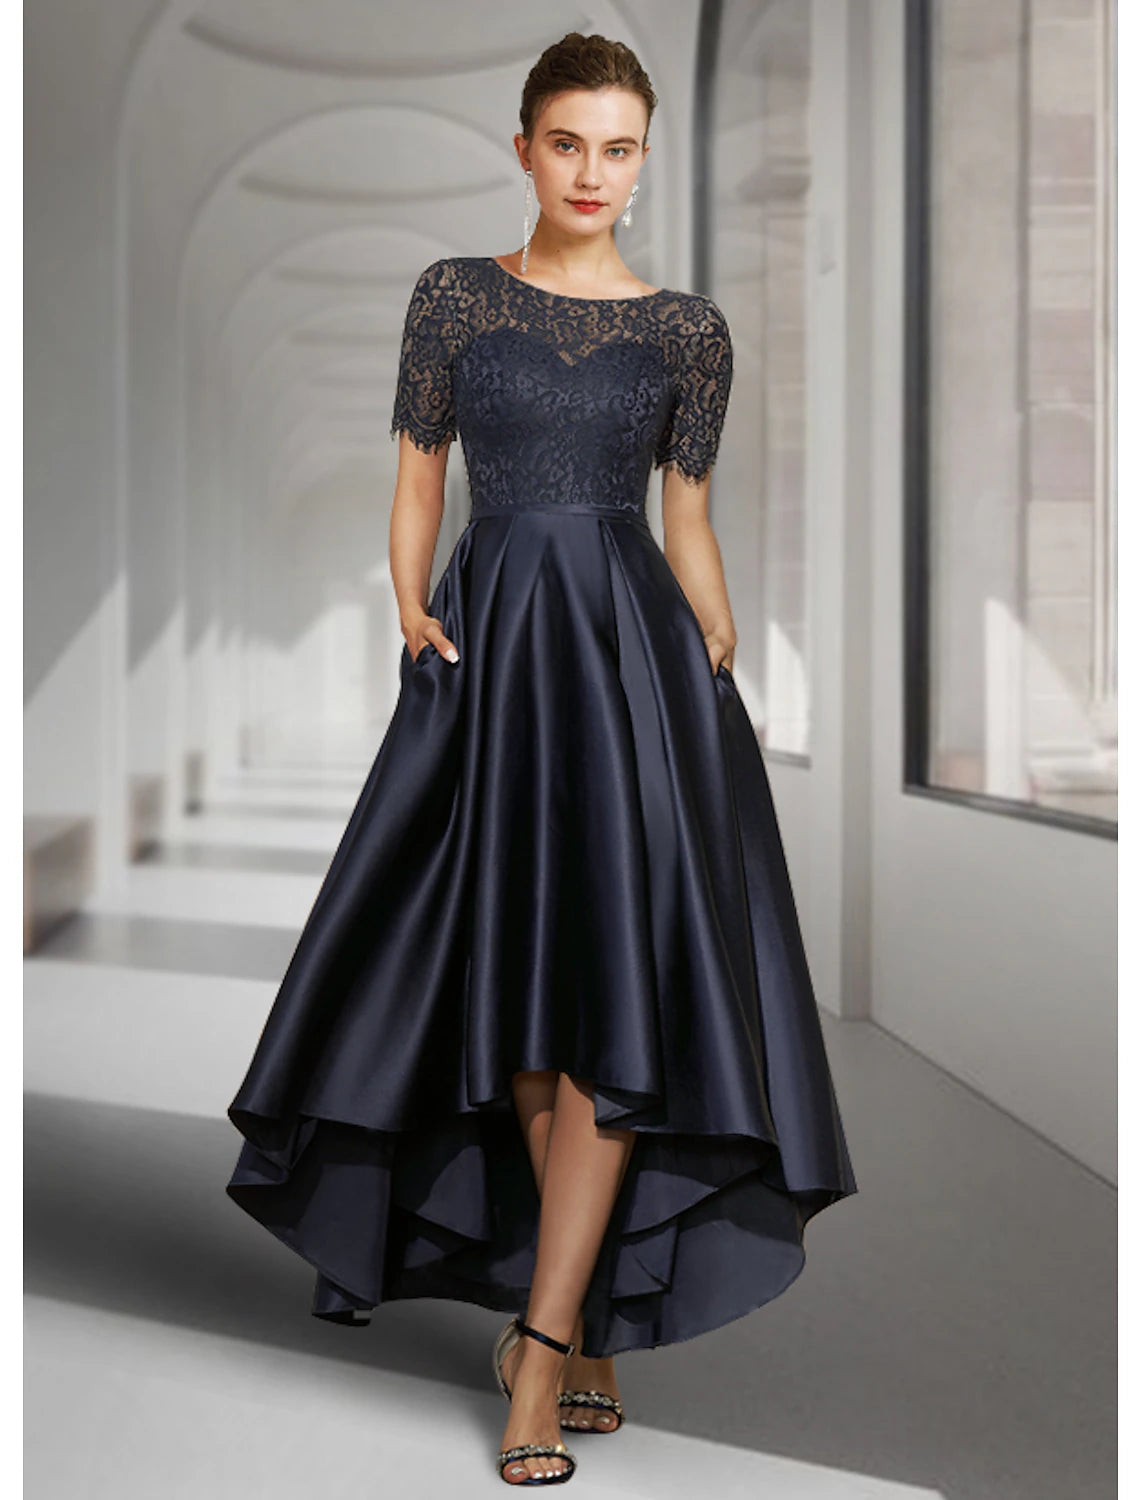 A-Line Mother of the Bride Dress Fall Wedding Guest Elegant High Low Jewel Neck Asymmetrical Tea Length Satin Lace Short Sleeve with Pleats